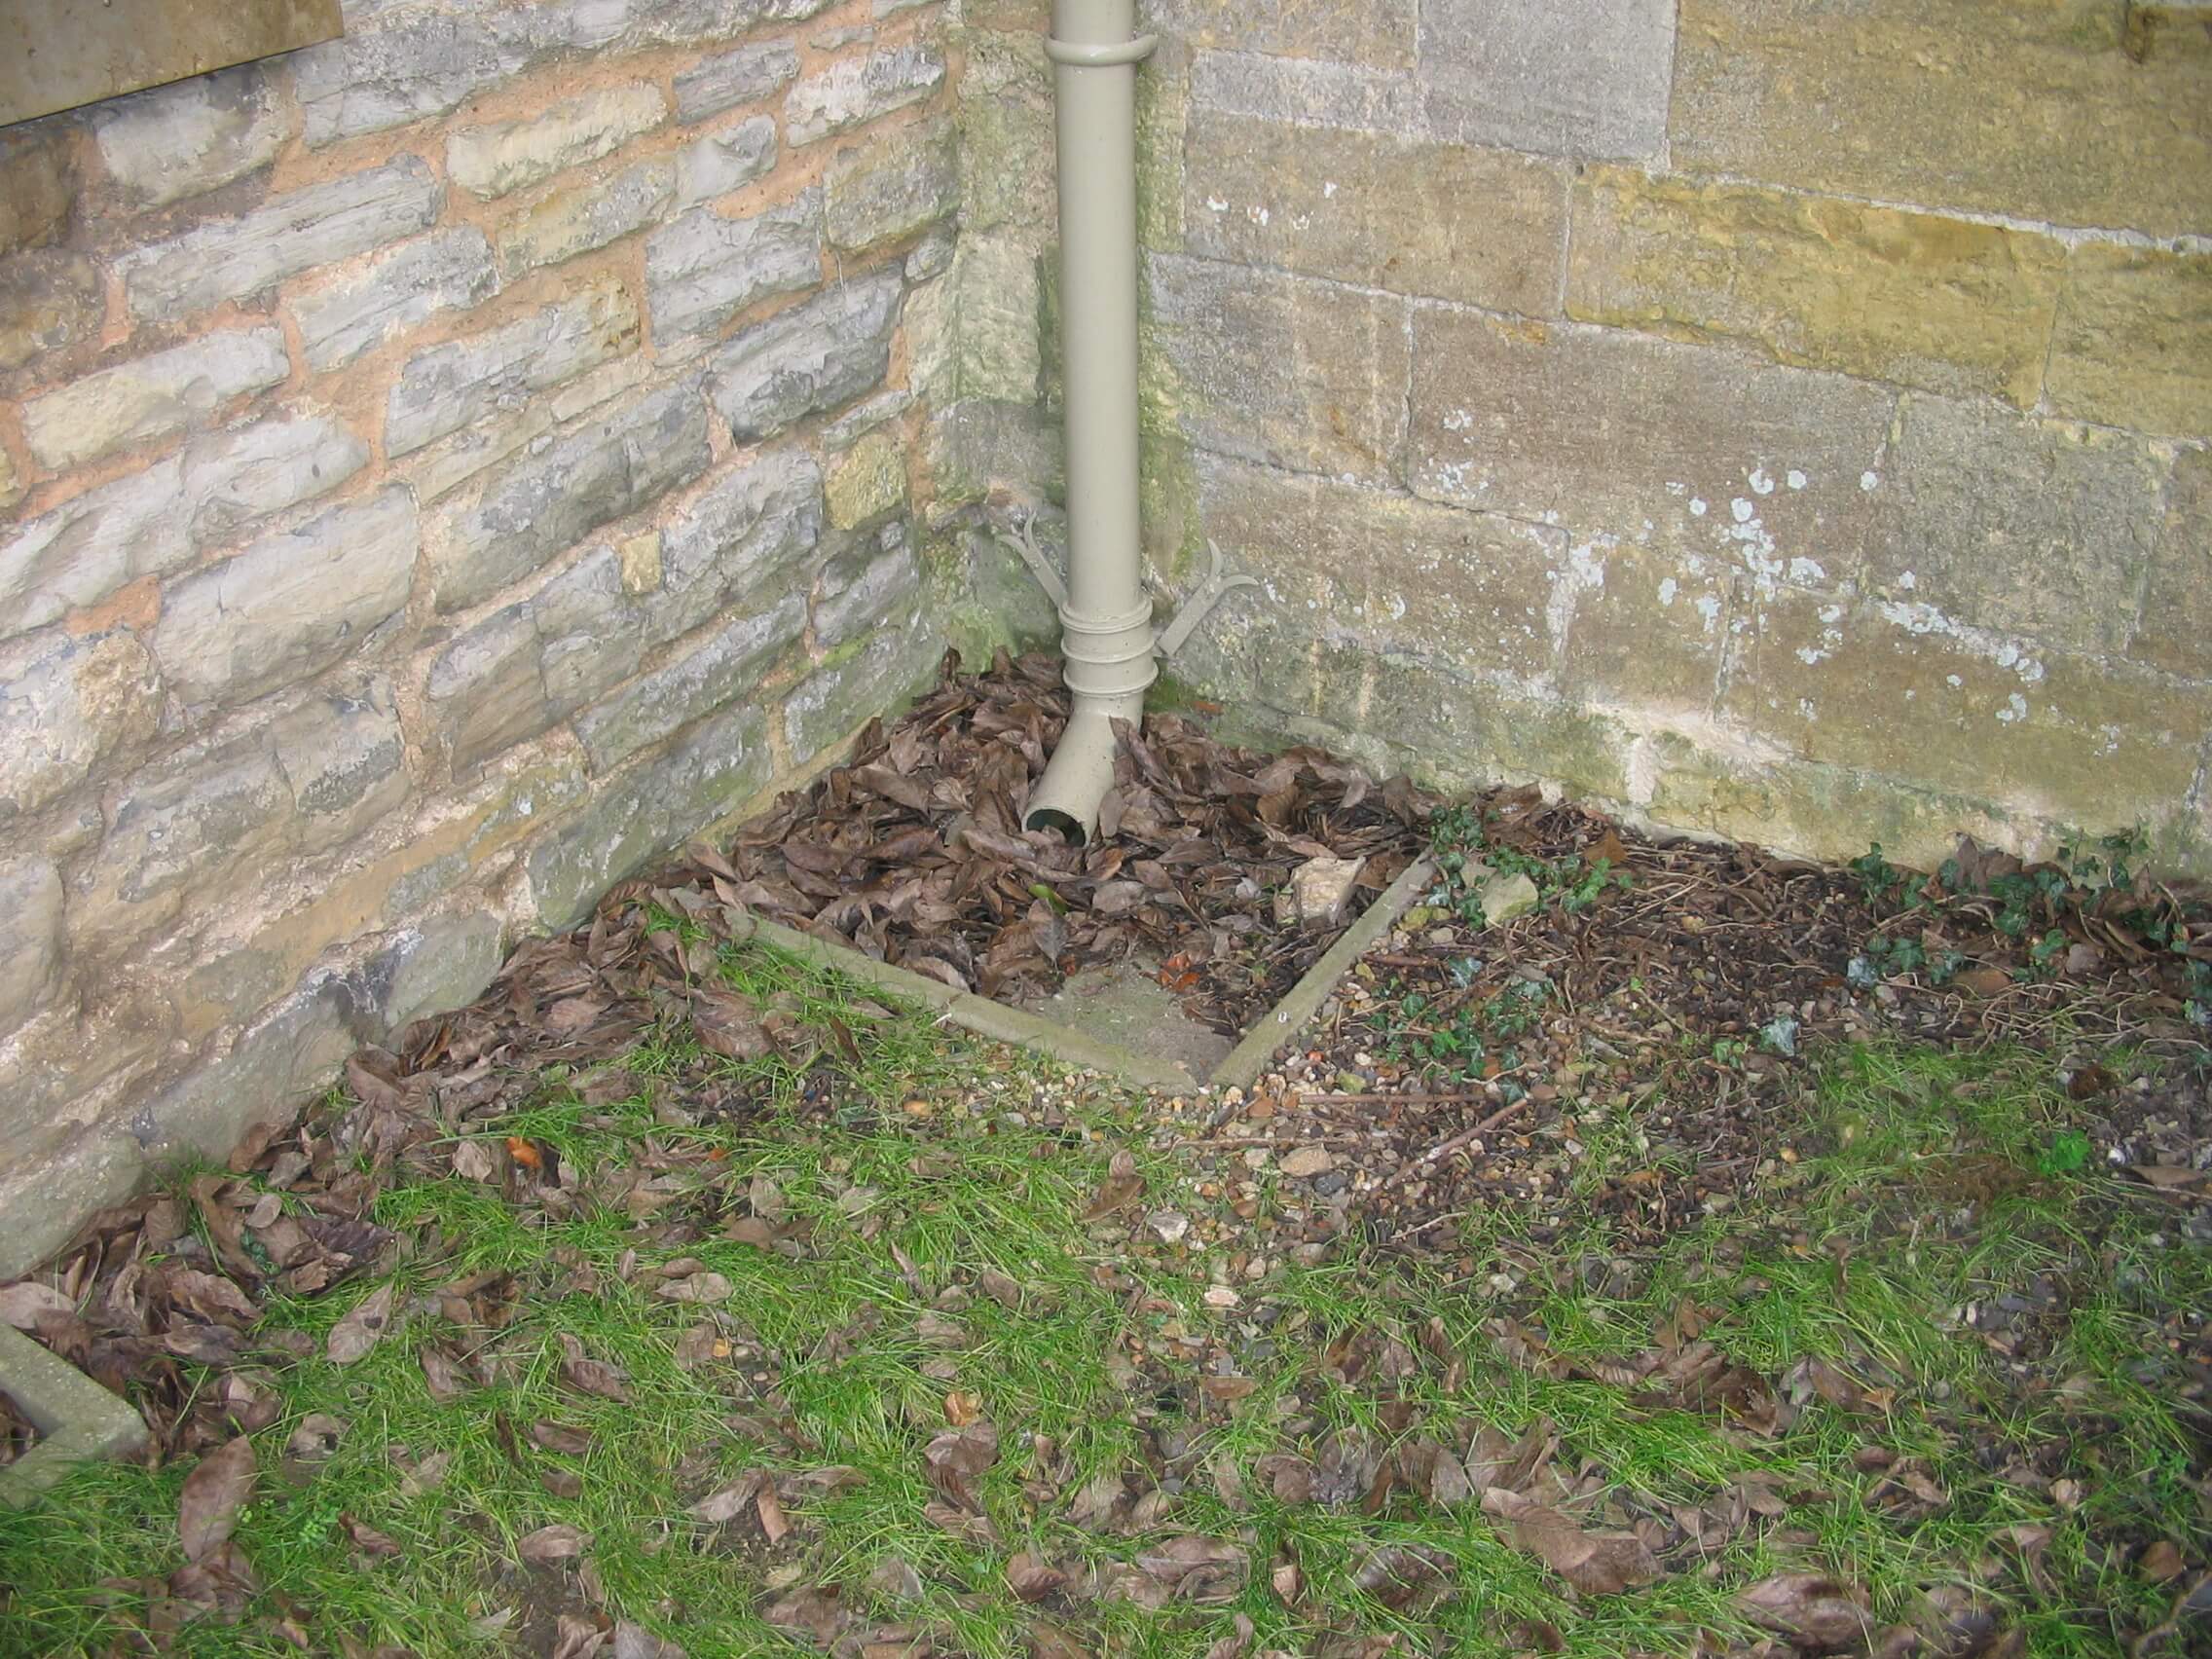 Downpipe with leaves in gutter